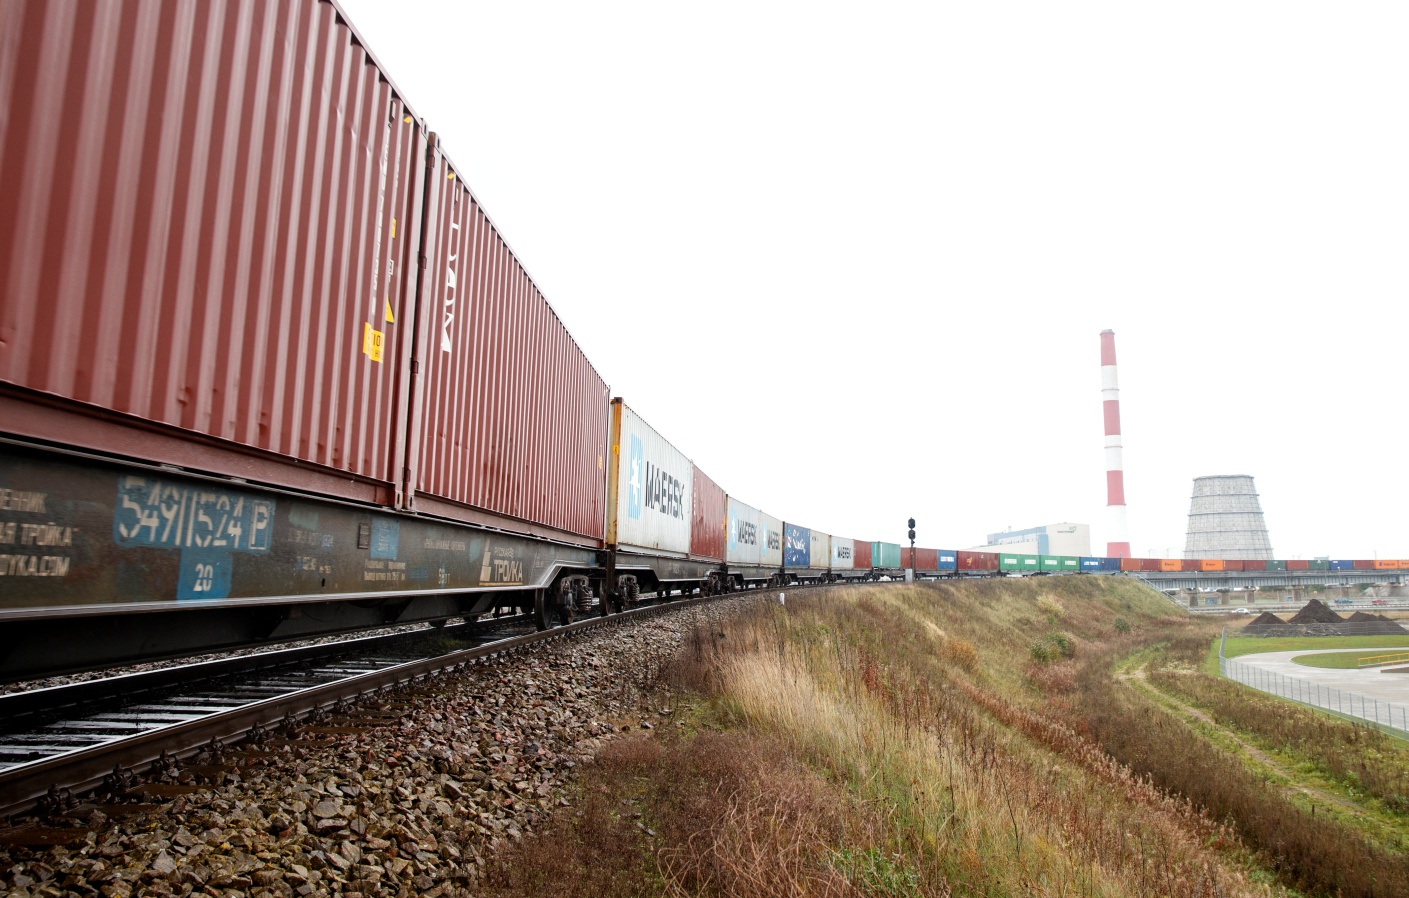 Amber Train speeds up movement of cargoes between Western Europe and Baltic States